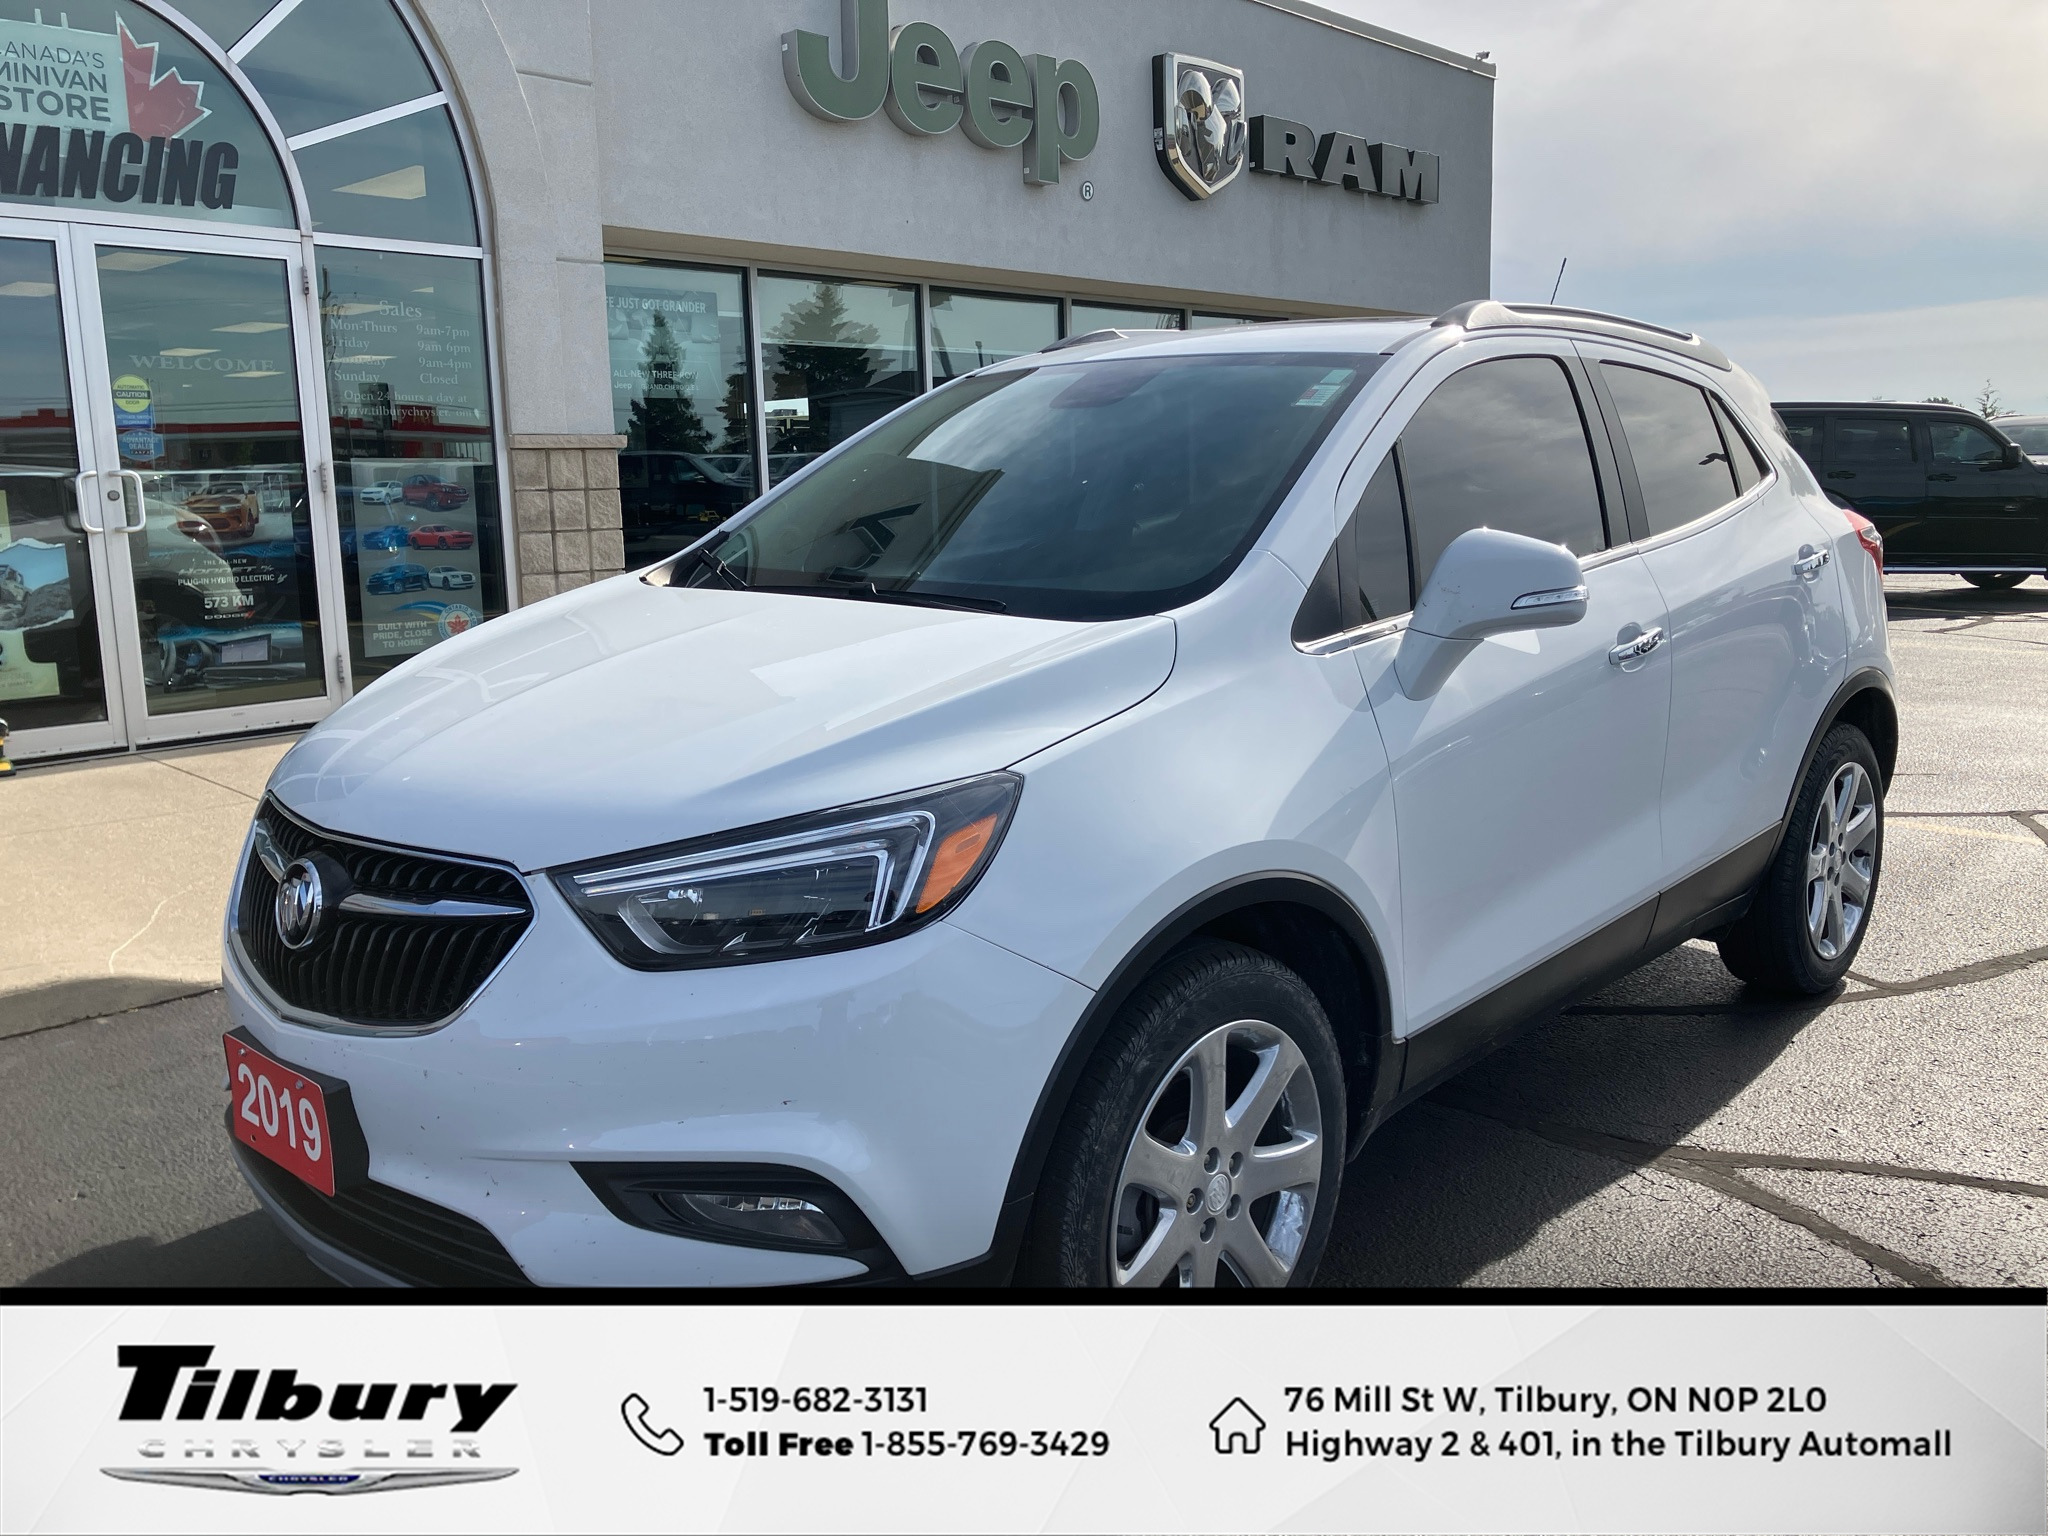 2019 Buick Encore Just Arrived! Still Needs a Bath